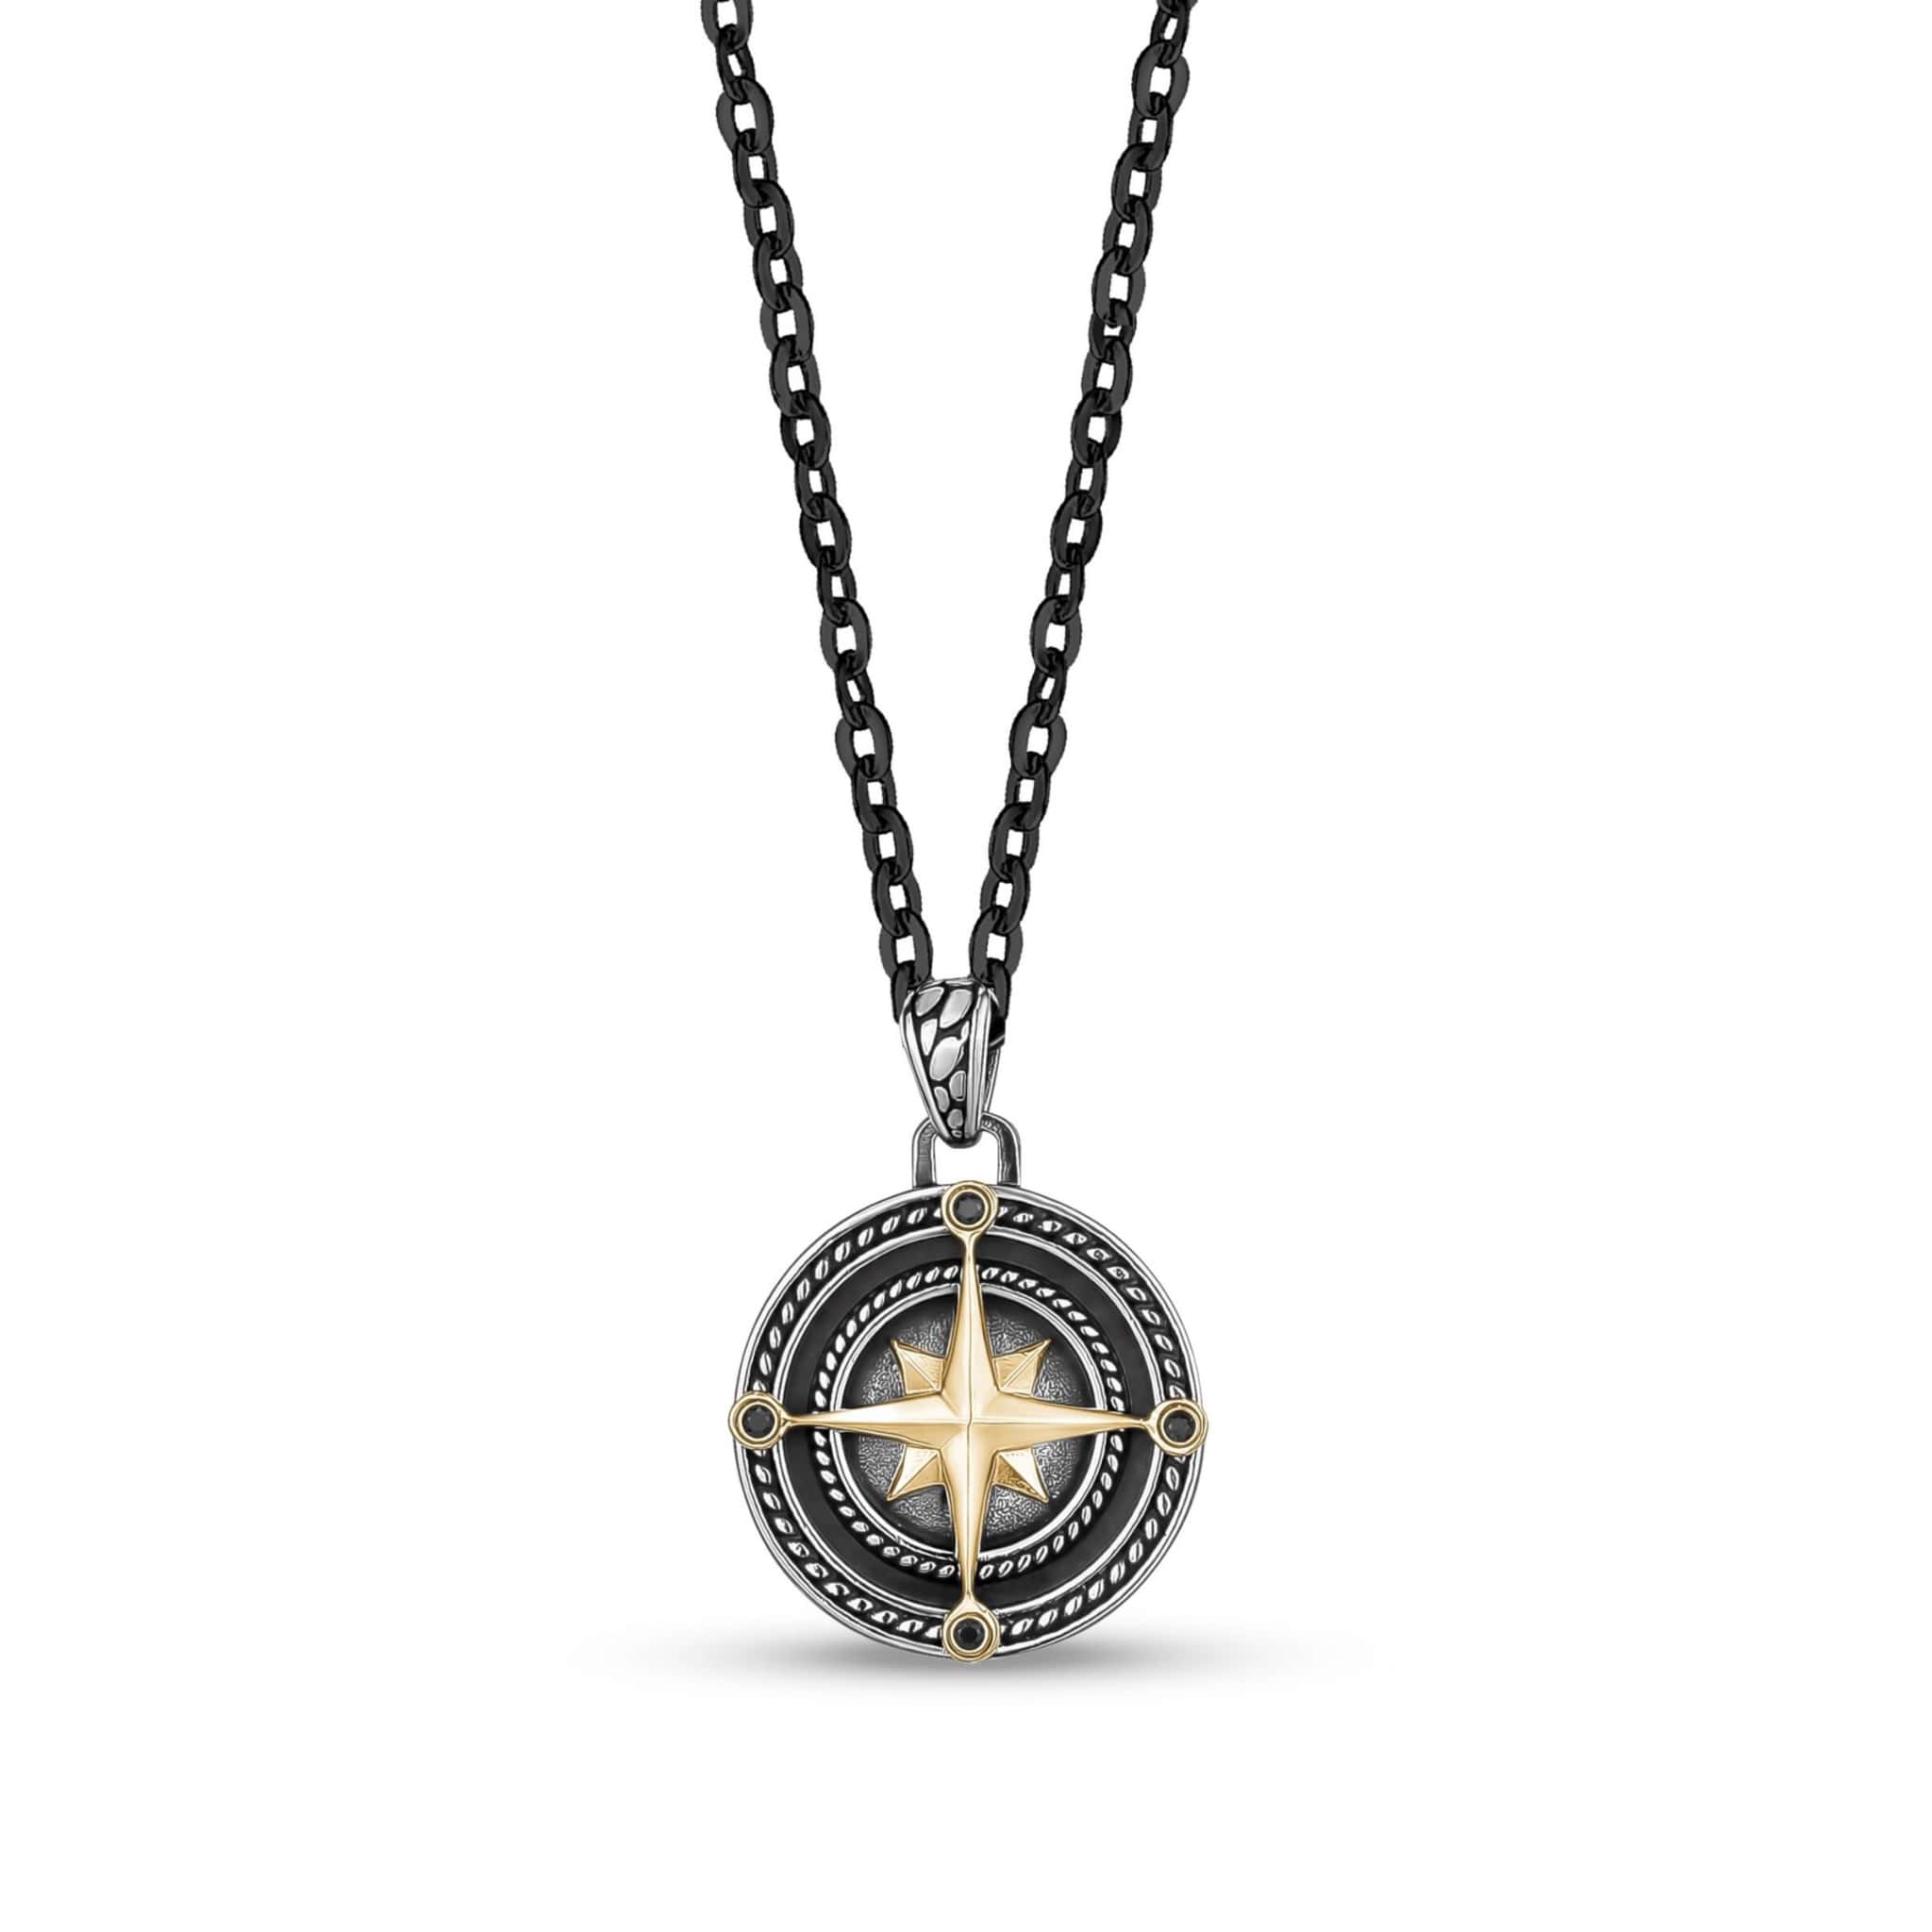 Mahi Oxidised Round Pendant Cross Compass Necklace Chain for Men (PS11